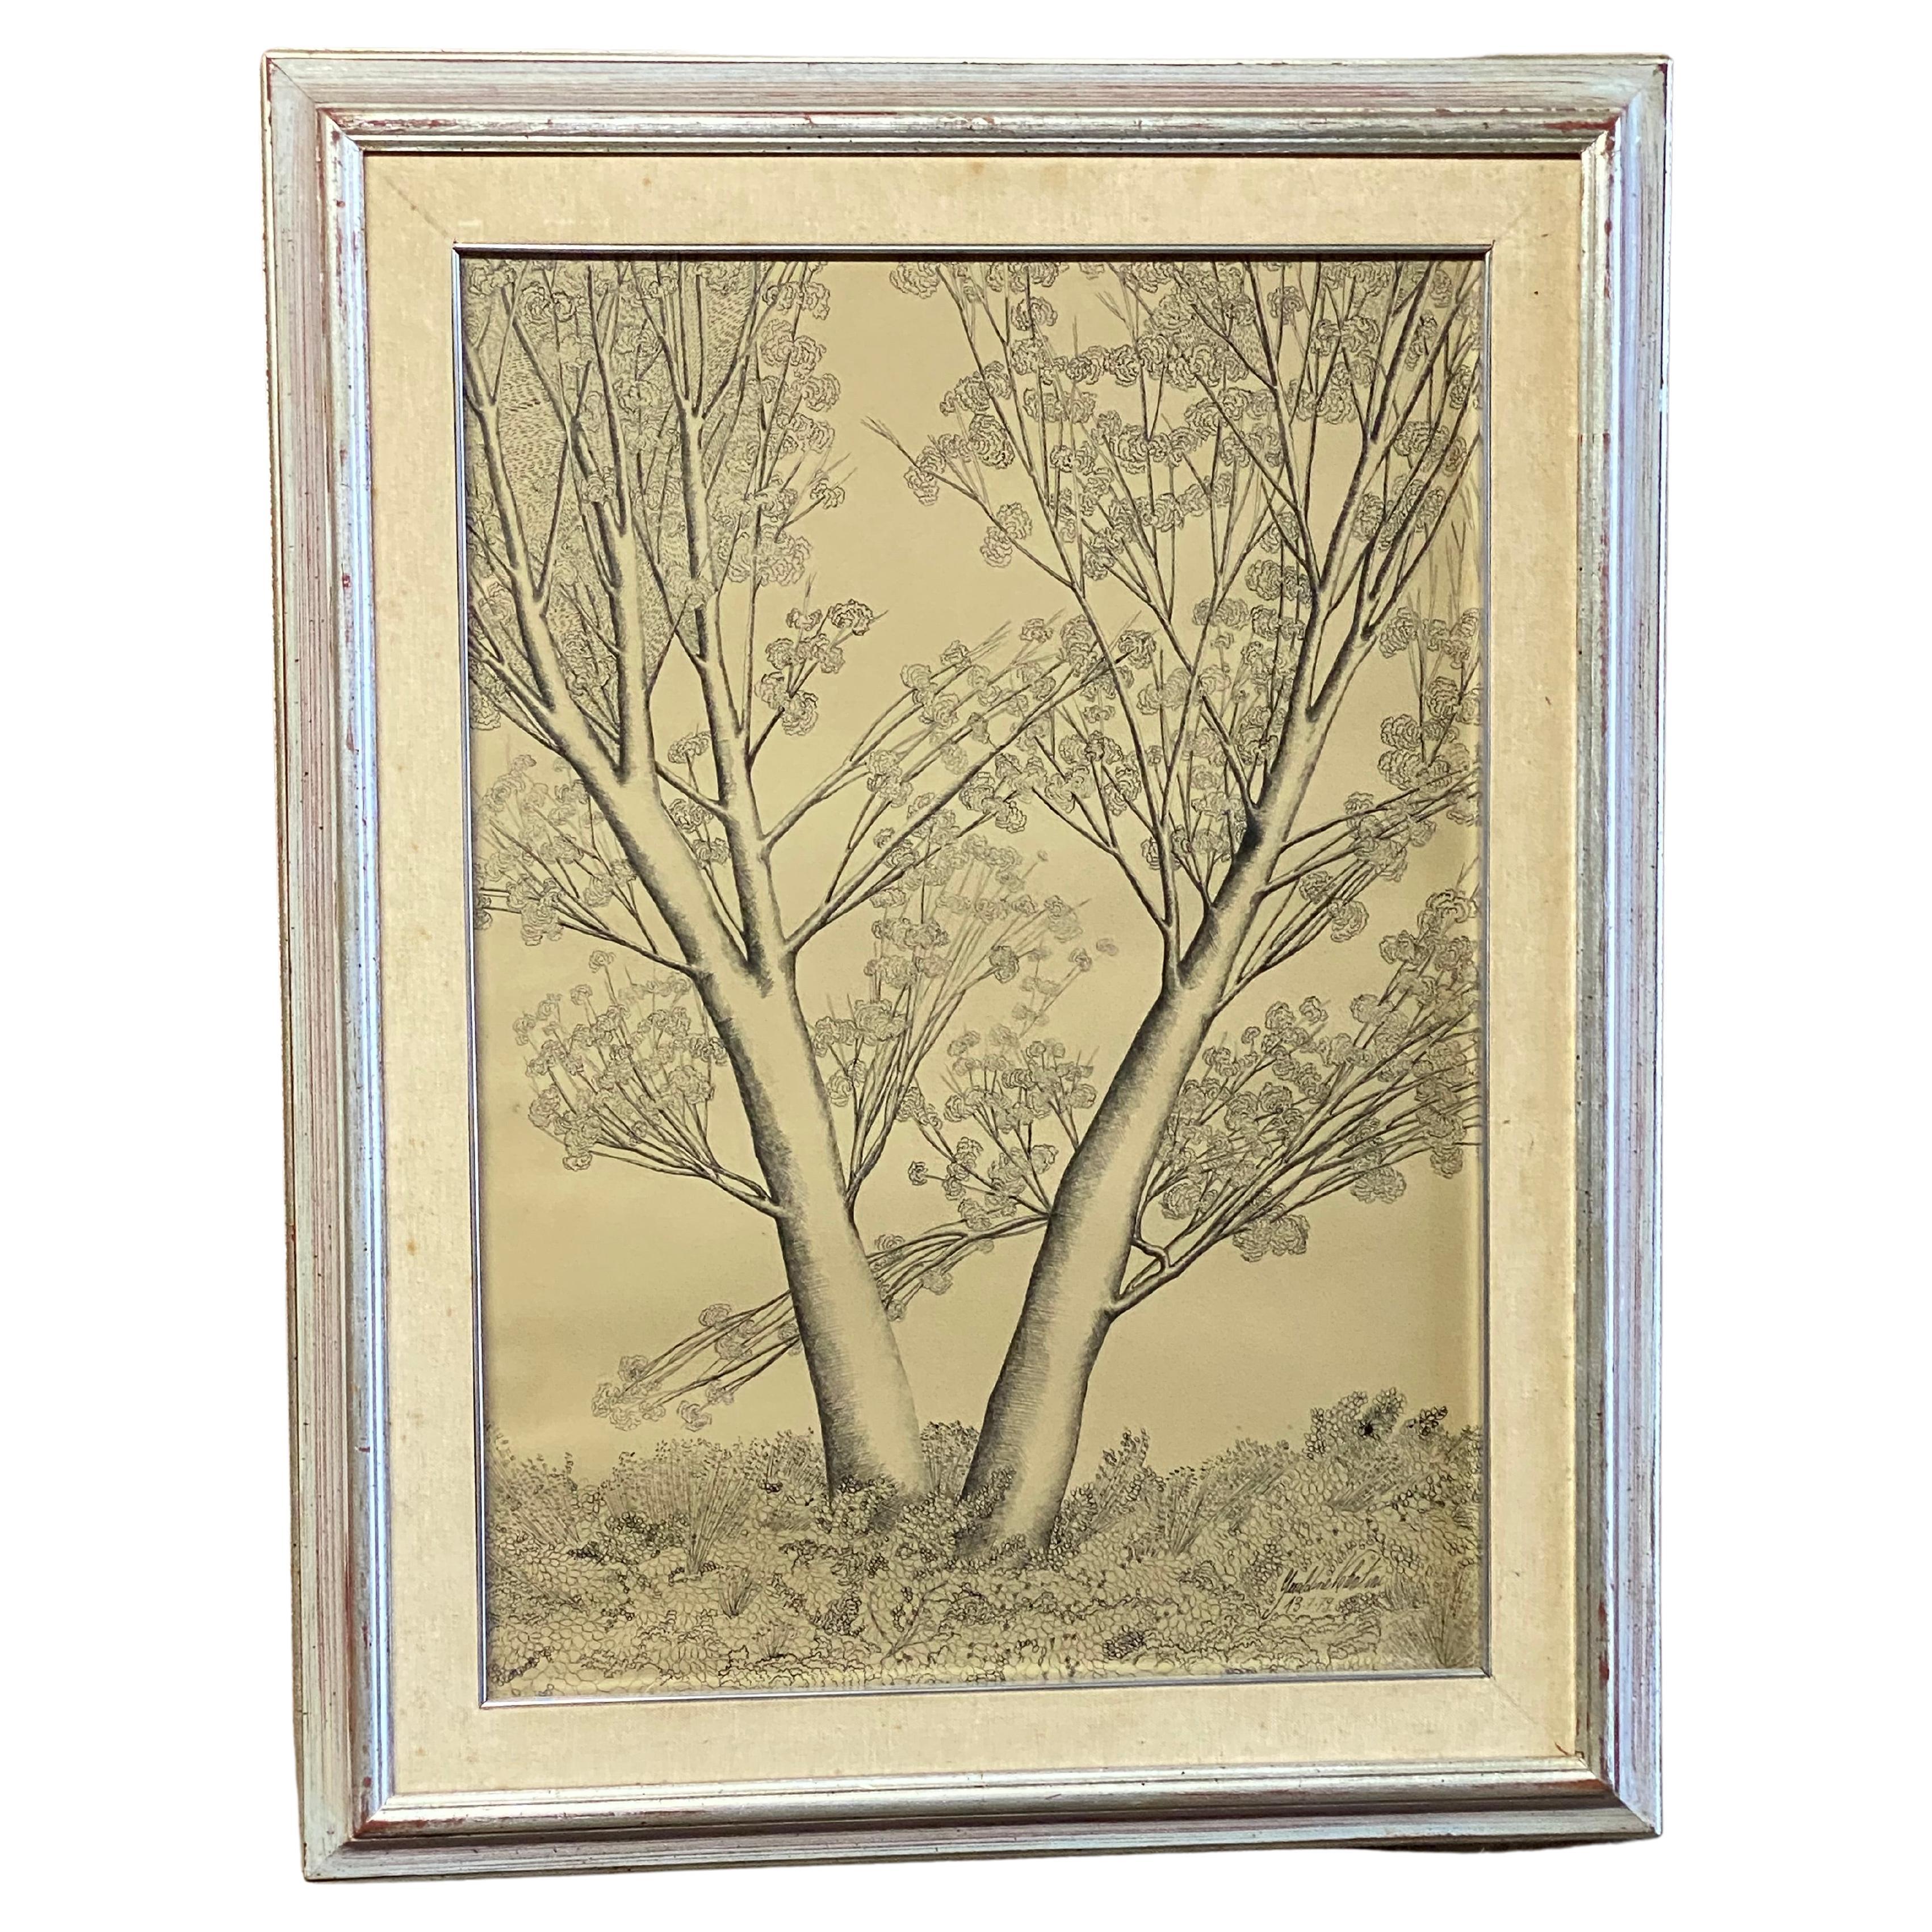 Signed Geraldine Valentini and dated 1979. Pen and ink Post-Modern drawing on paper. Modernist rendition of two sprawling limb trees. Labor intensive and intricately hand drawn work on paper. 

Framed in a silver gilt wood molding with a linen